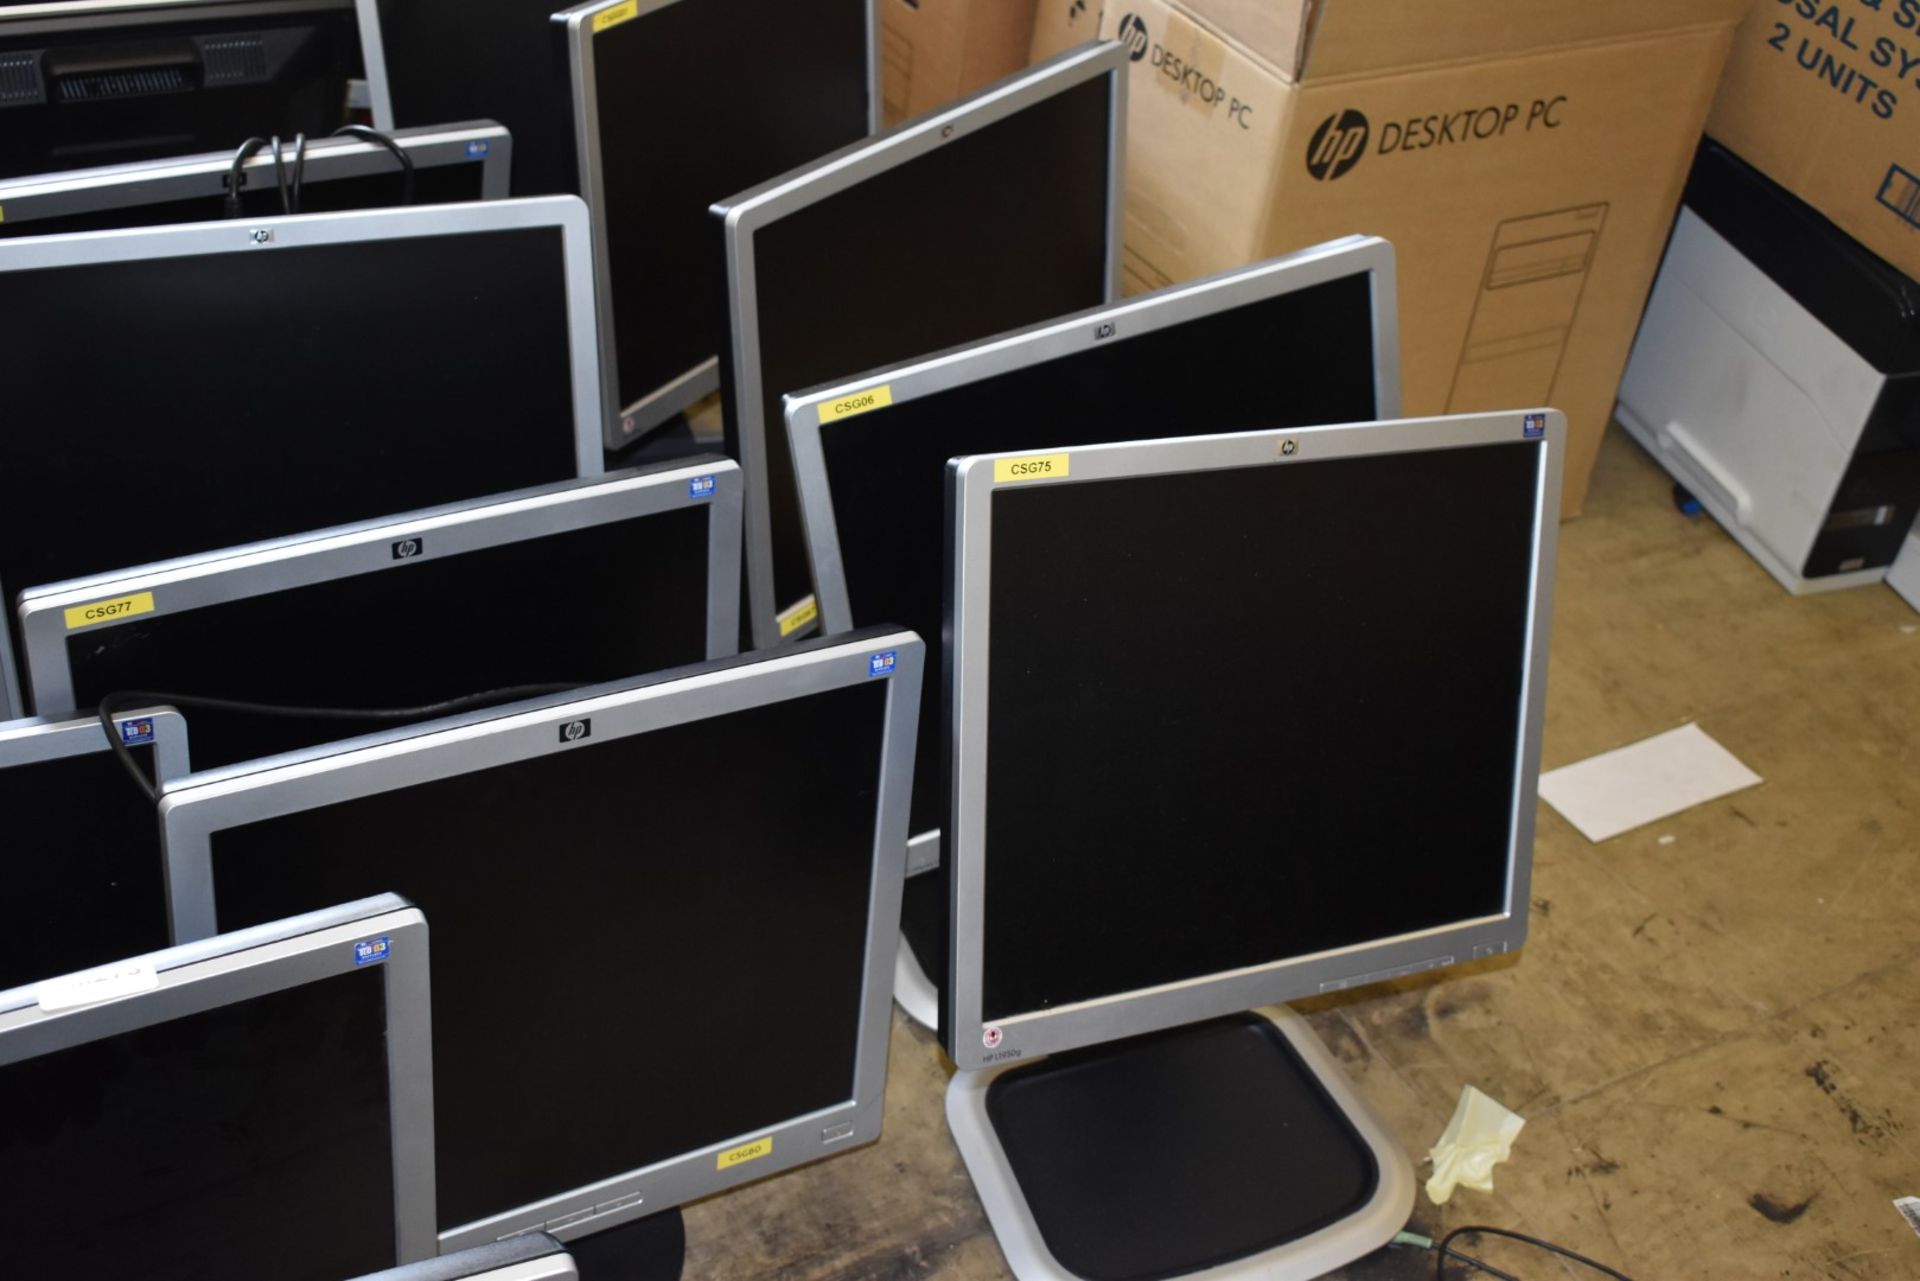 31 x HP Flatscreen Computer Monitors - Includes 15 Inch and 17 Inch Models - Ref VM273 IT - - Image 3 of 4